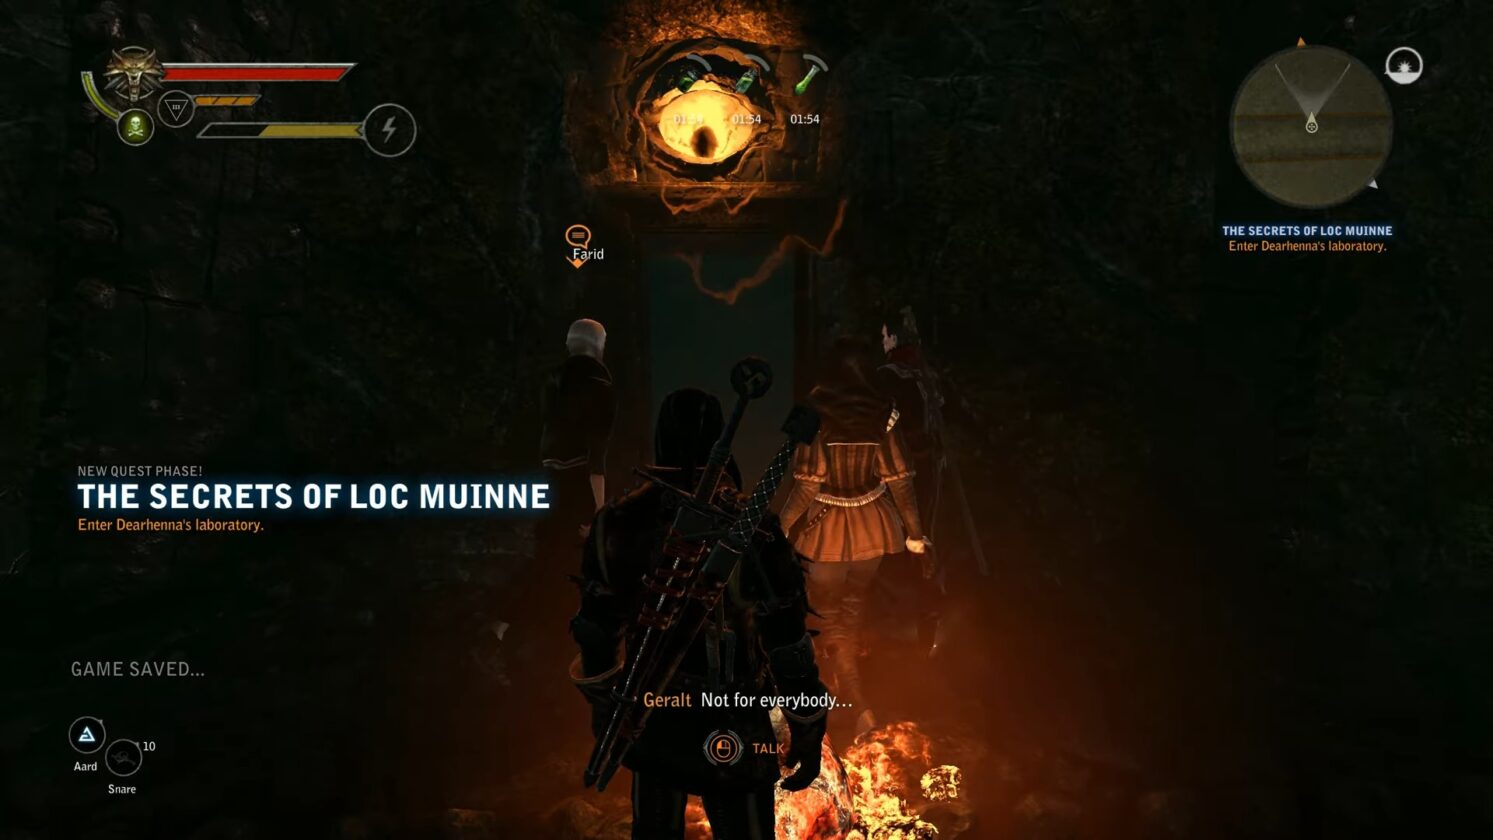 Answers for Guardian's eye riddles in the Secrets of Loc Muinne Quest